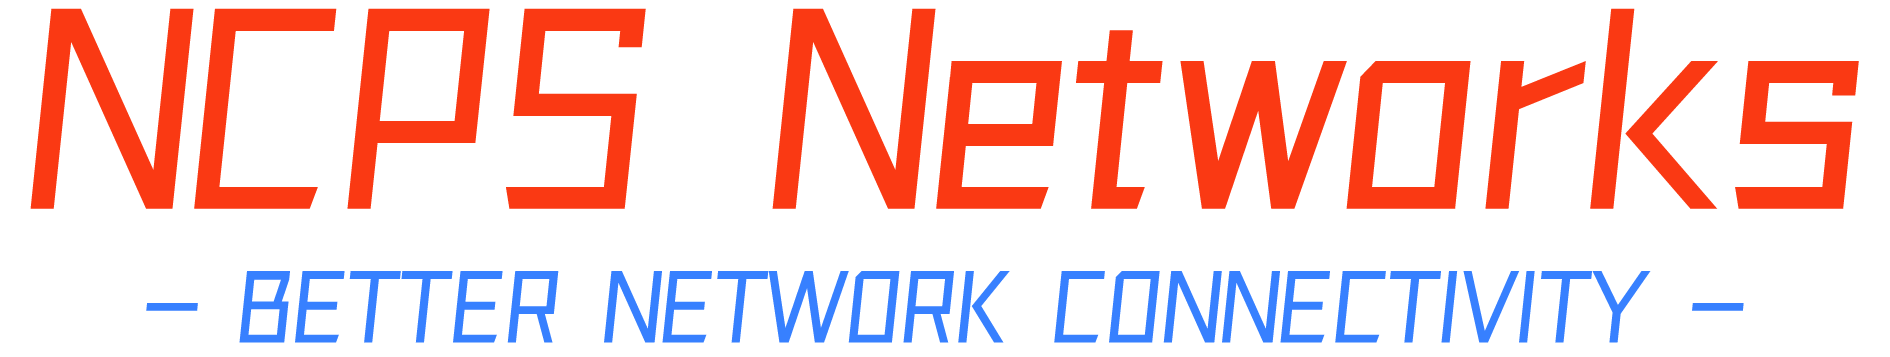 NCPS Networks